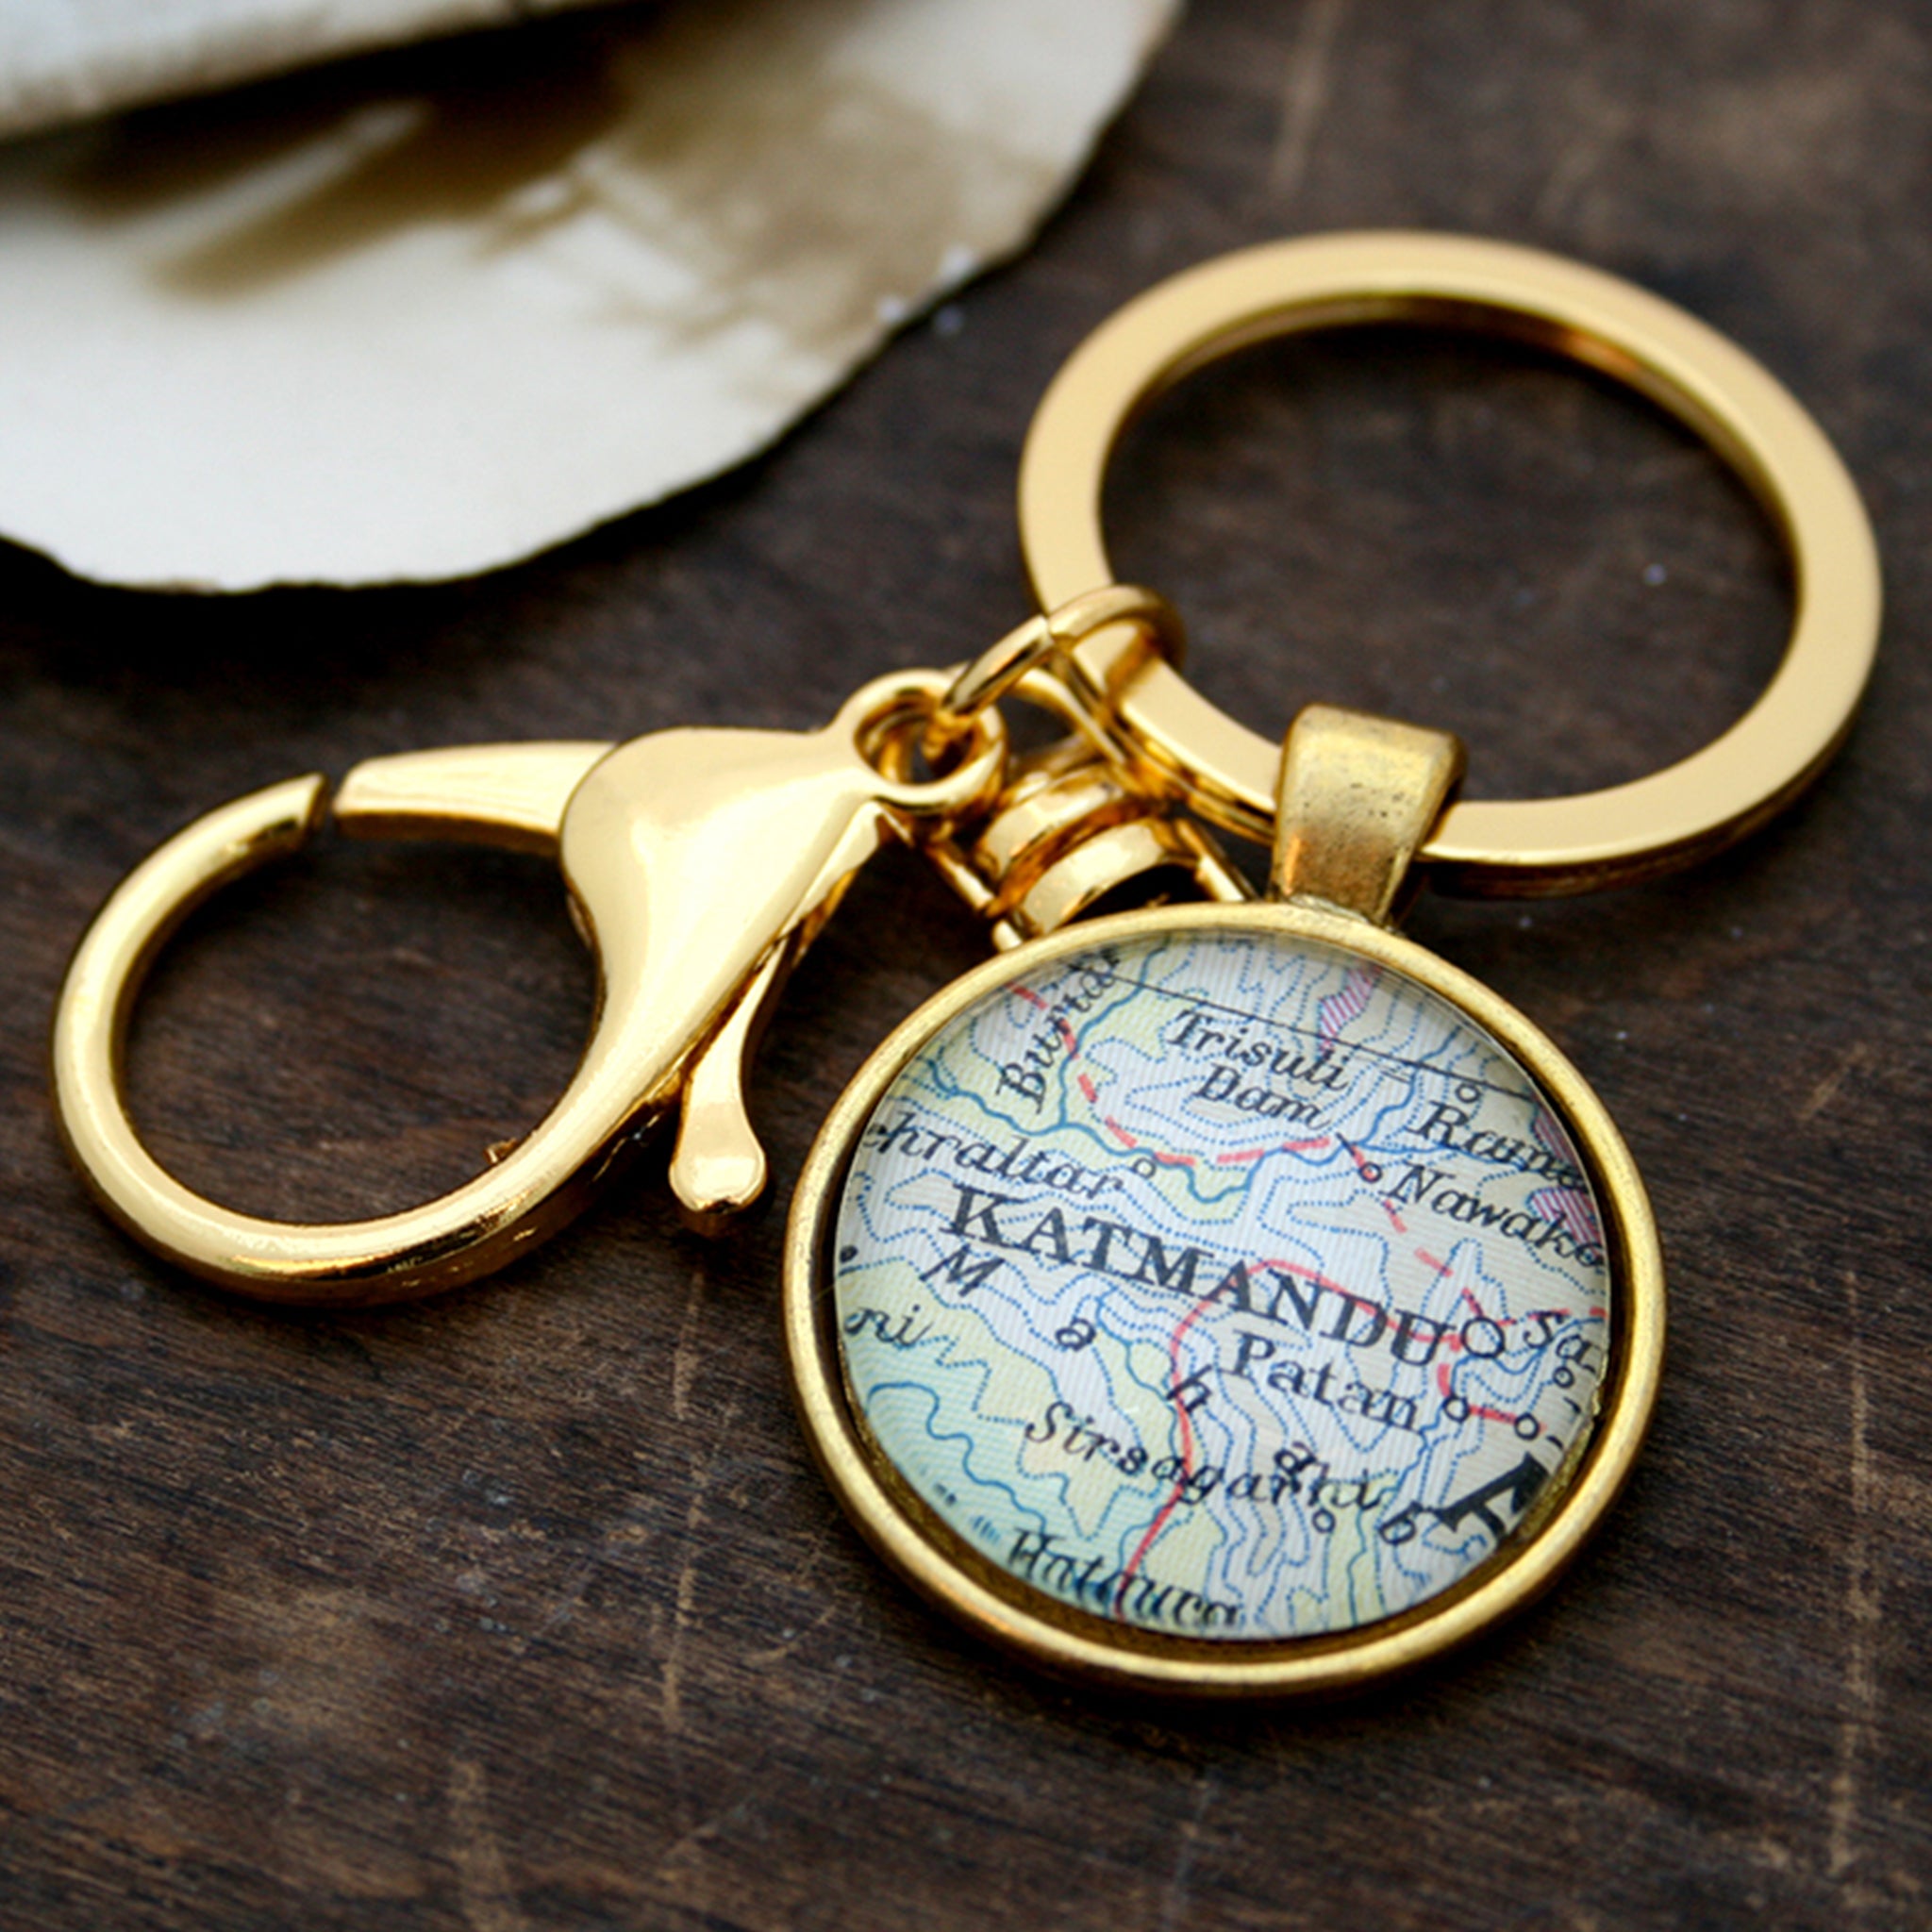 Personalised keyring in gold color featuring map of Kathmandu